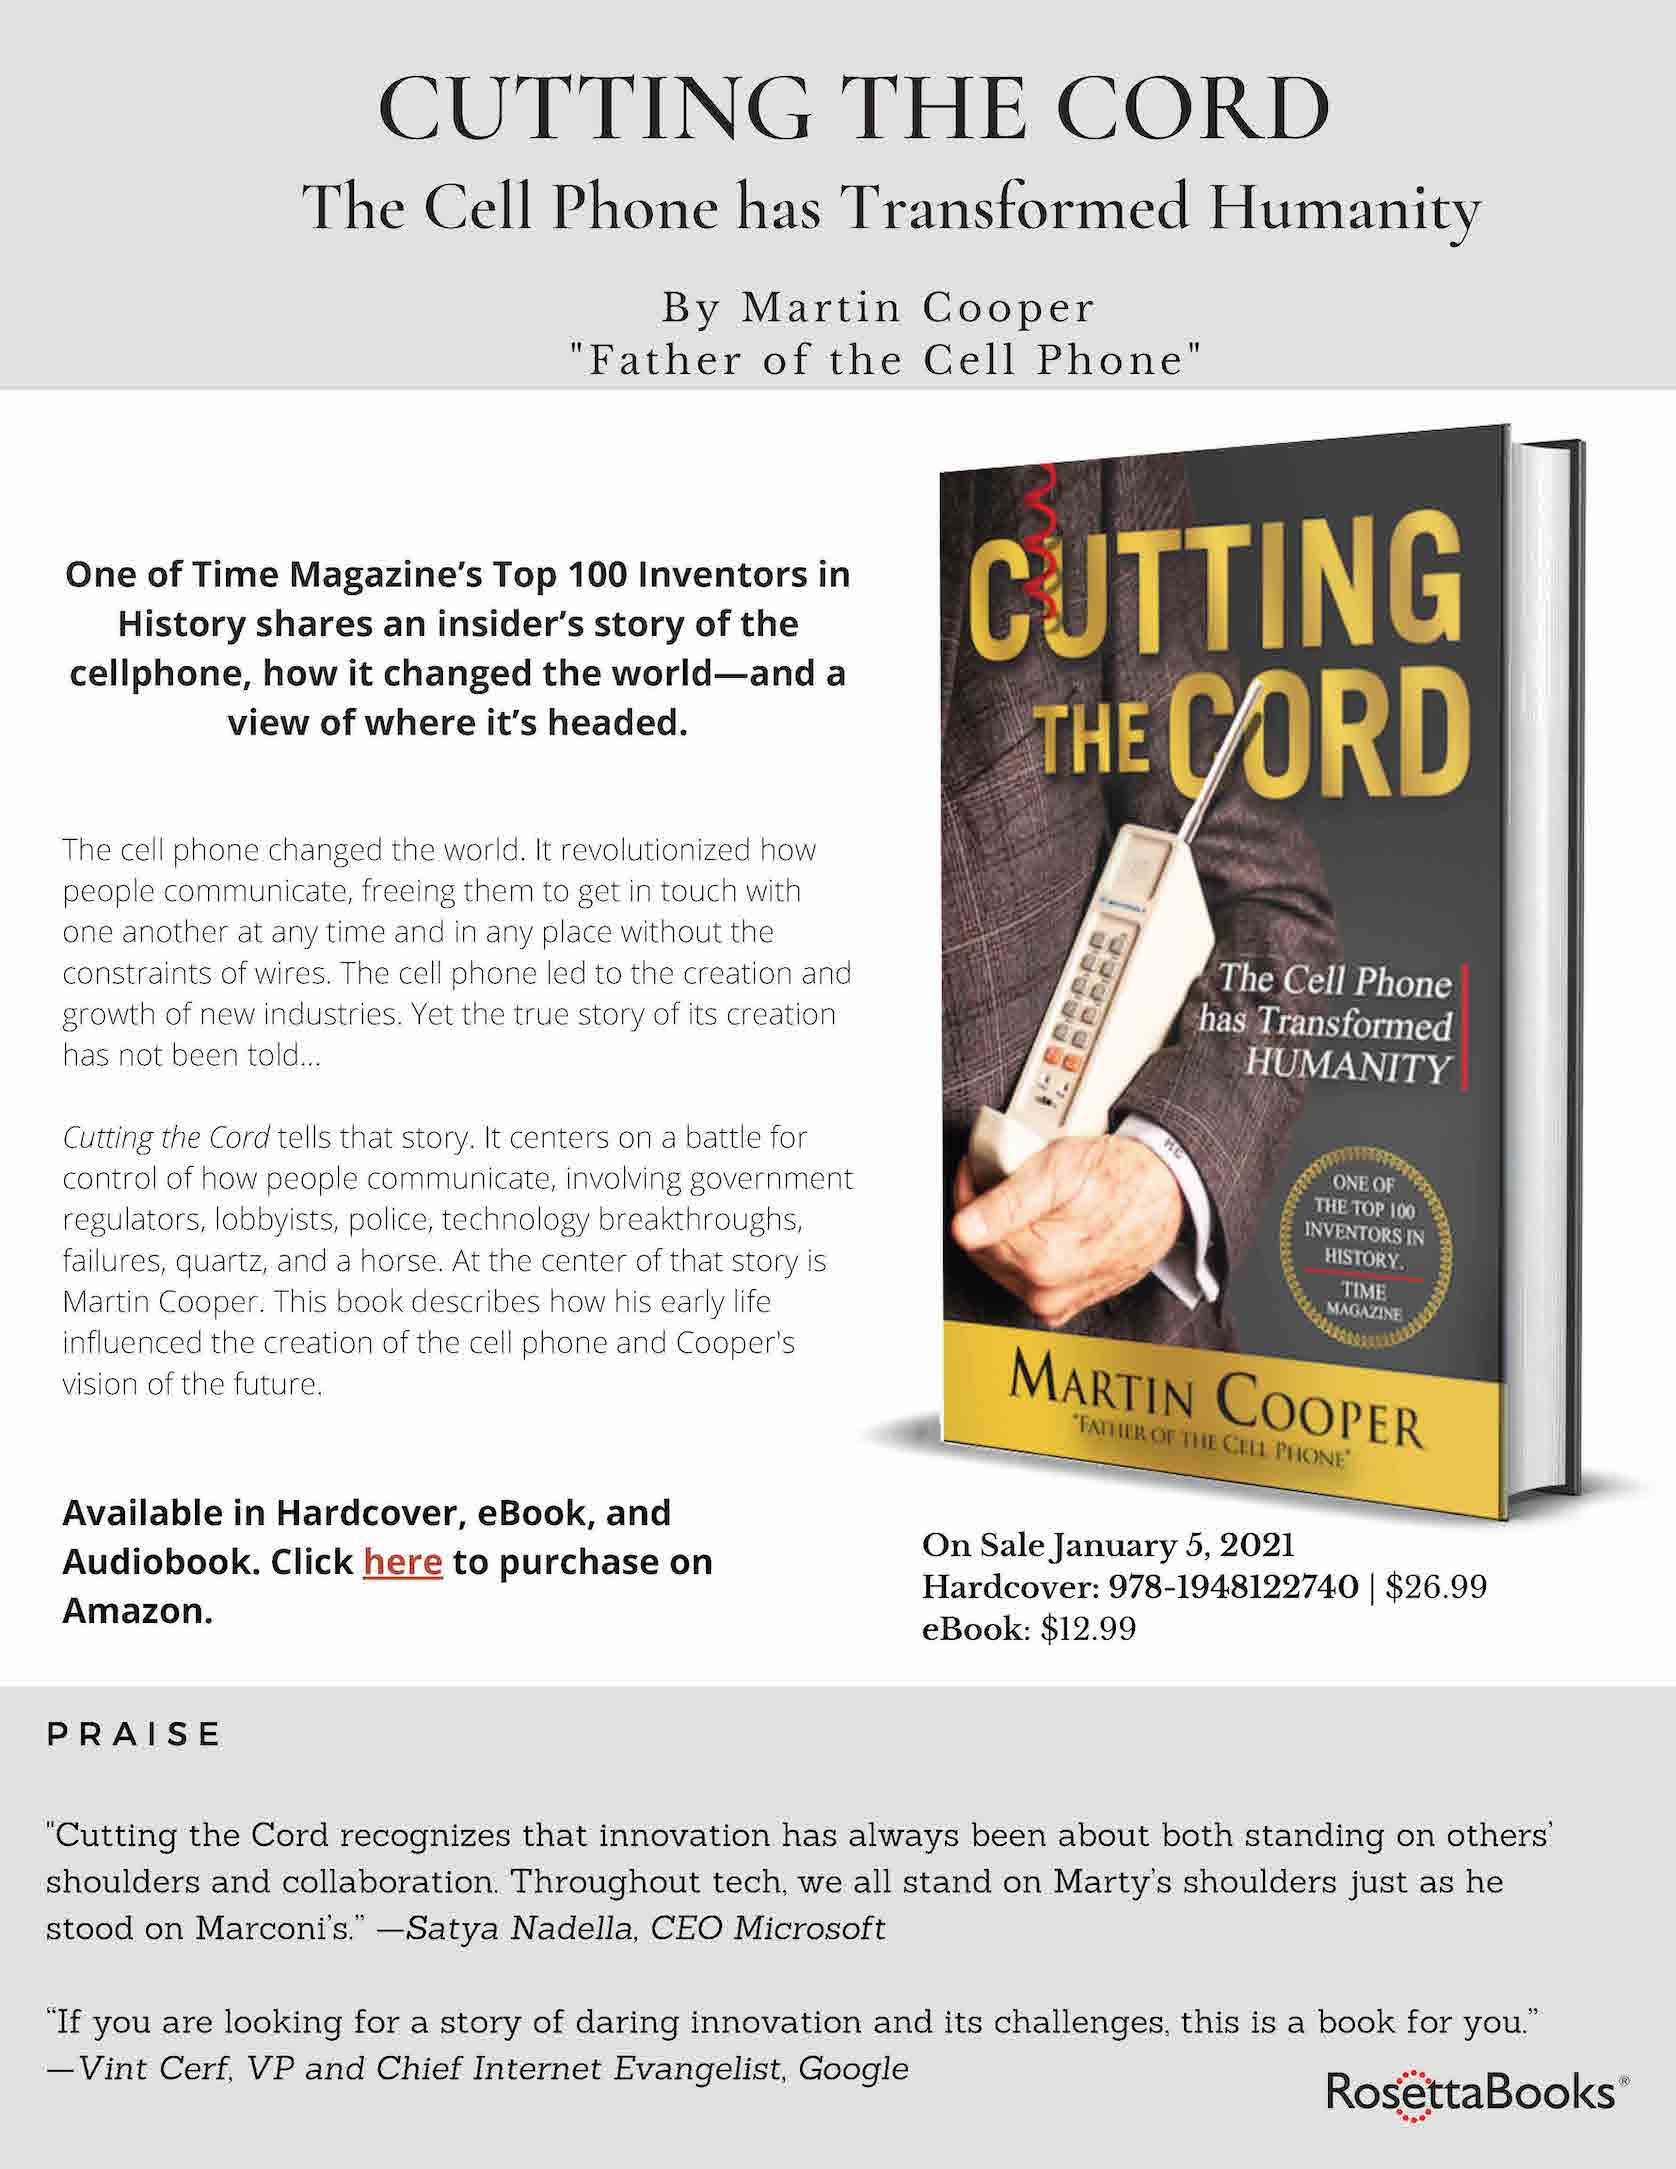 Cutting the Cord sell sheet